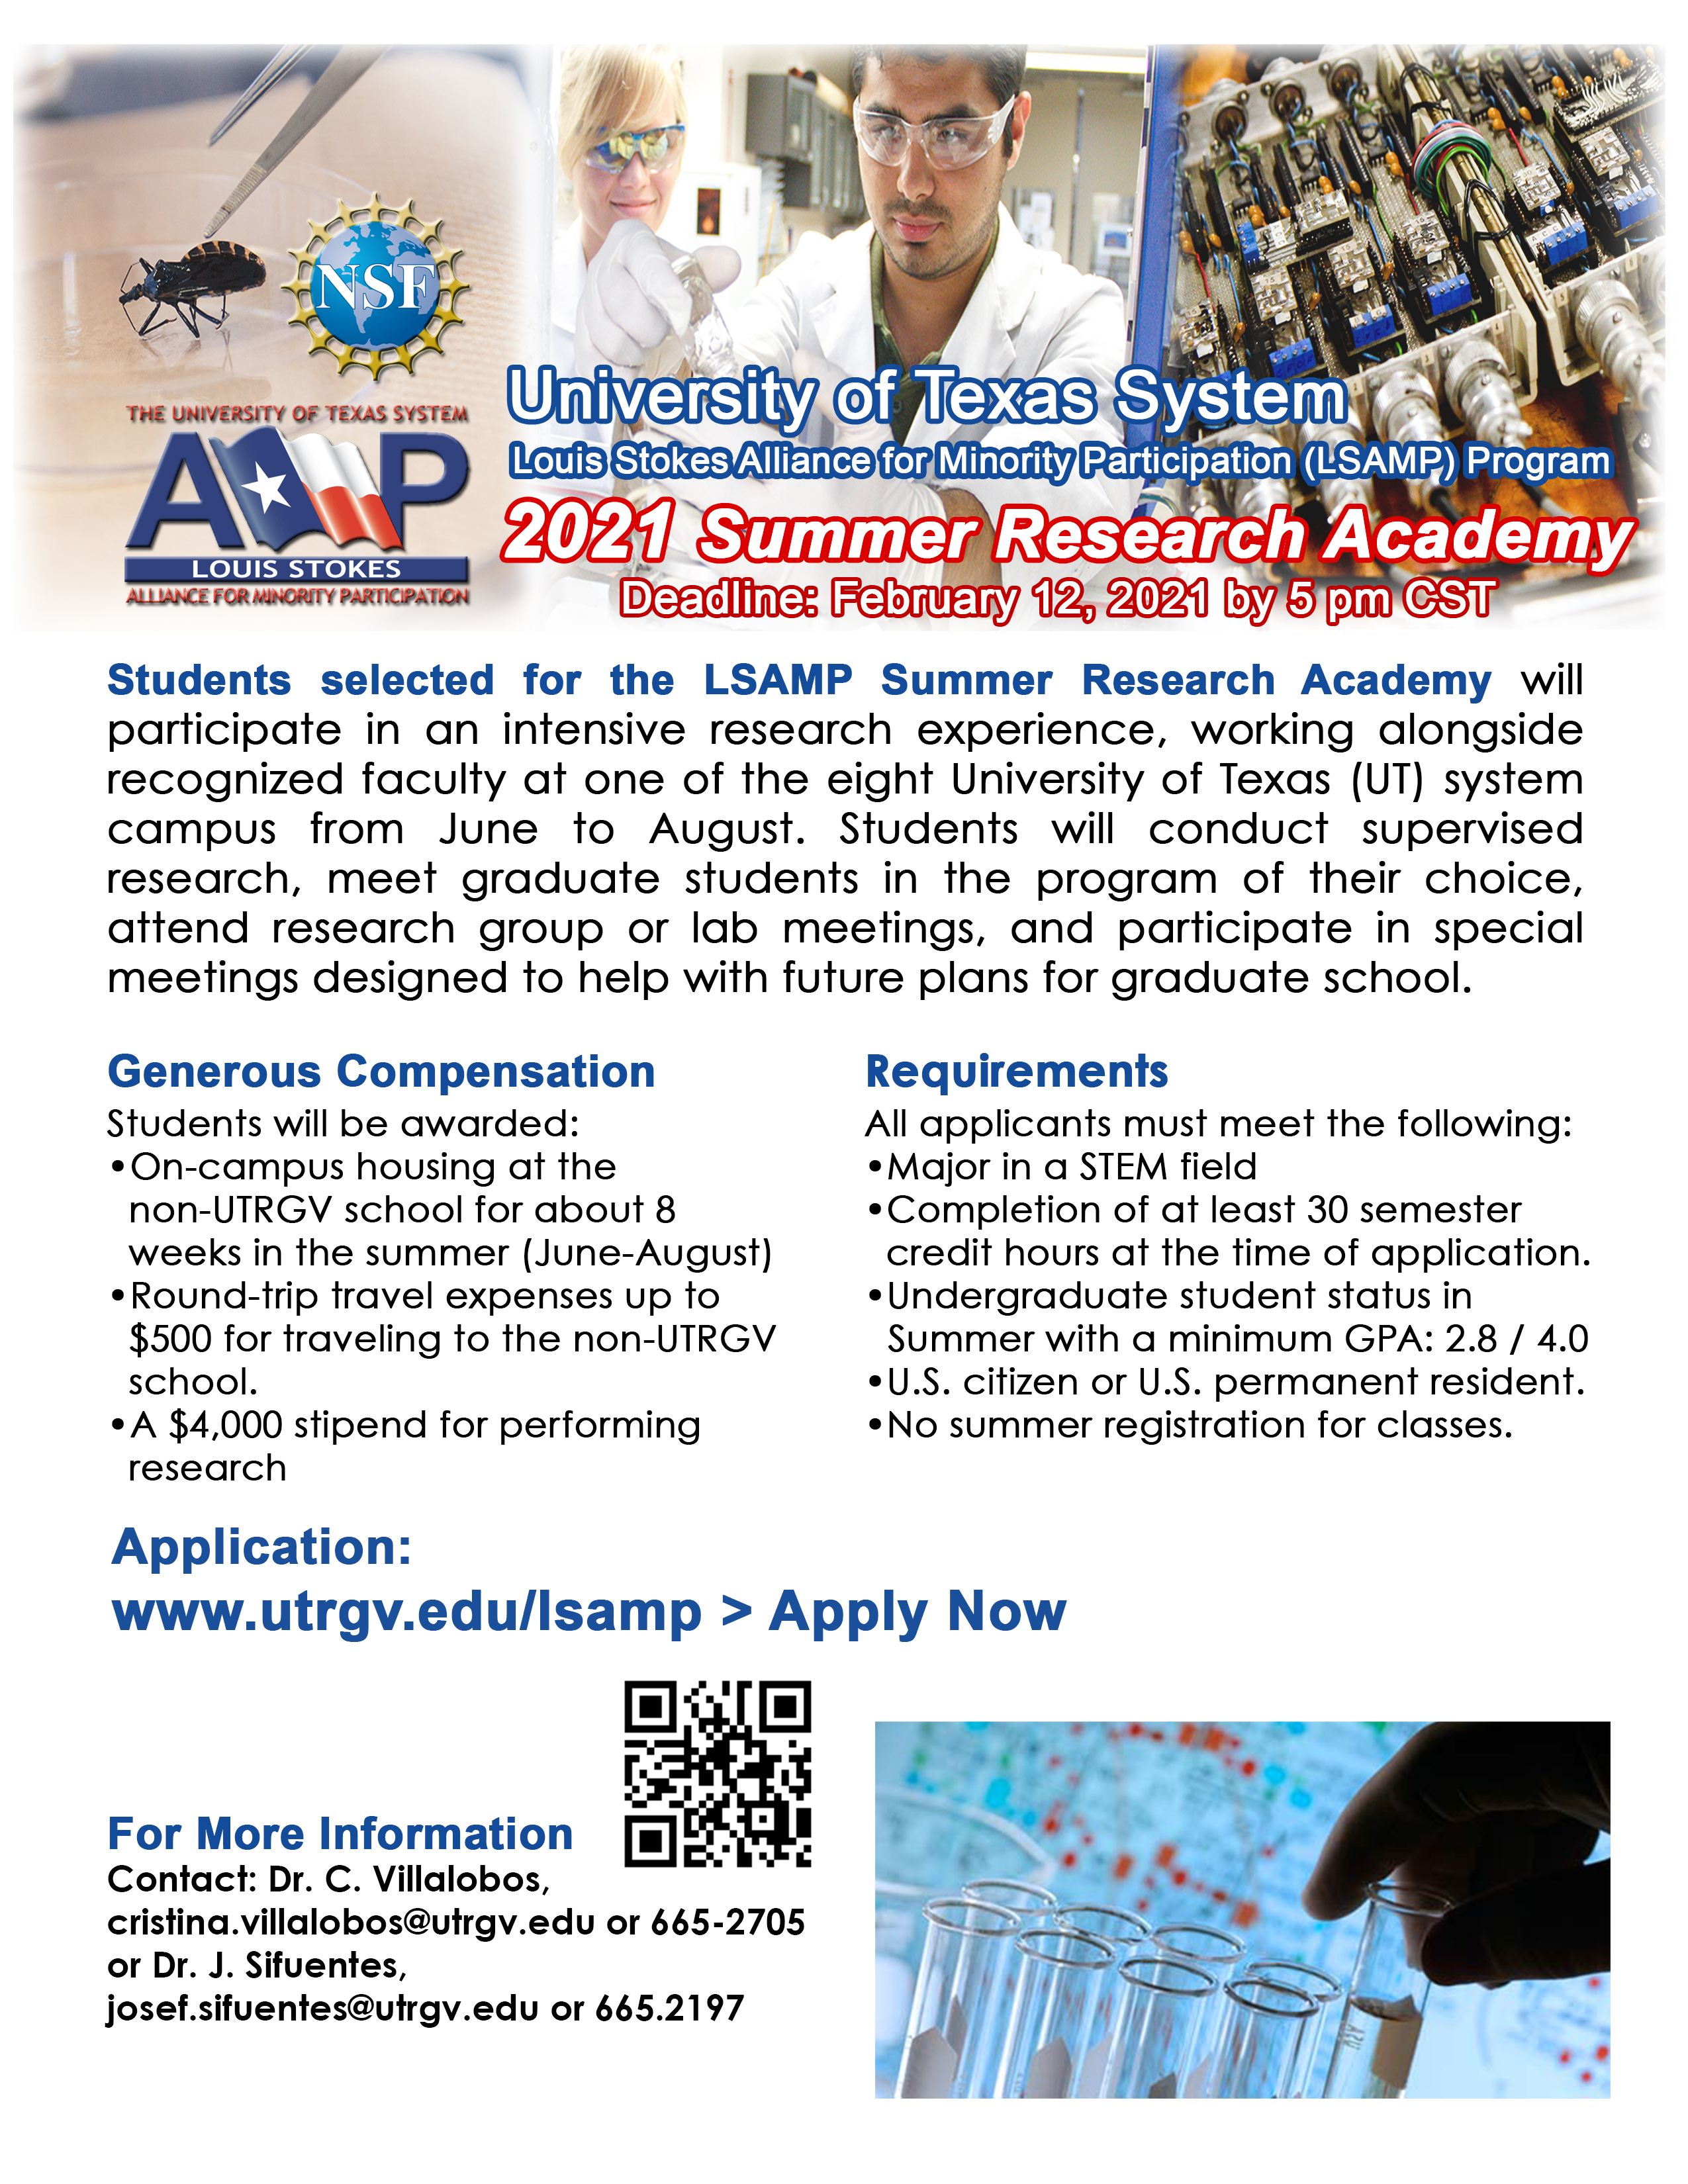 Download LSAMP 2021 Summer Research Academy Flyer PDF